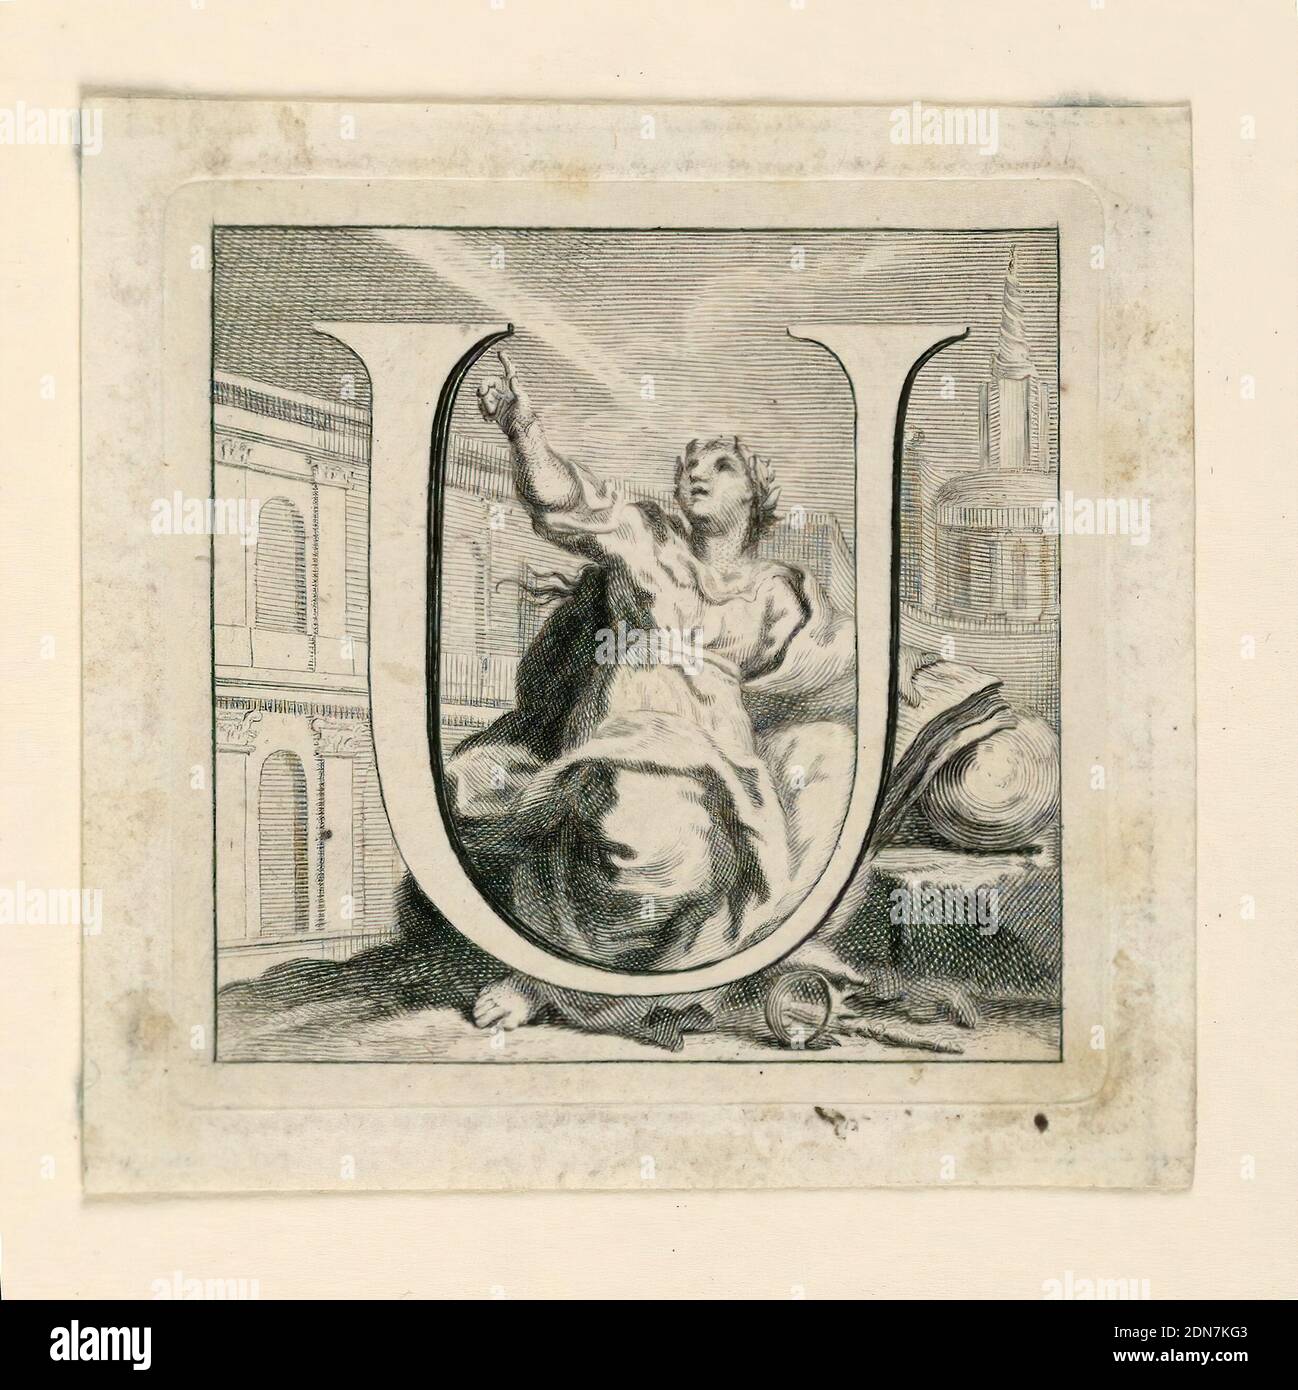 Decorated Capital Letter U, Jakob Frey, Swiss, active Italy, 1681 - 1752, Giovanni Passari, Italian, Engraving on paper, Letter U, before Urania, a woman similar to that as -a. The crest of the Sapienza serves as a background., Rome, Italy, ca. 1715, ephemera, Print Stock Photo